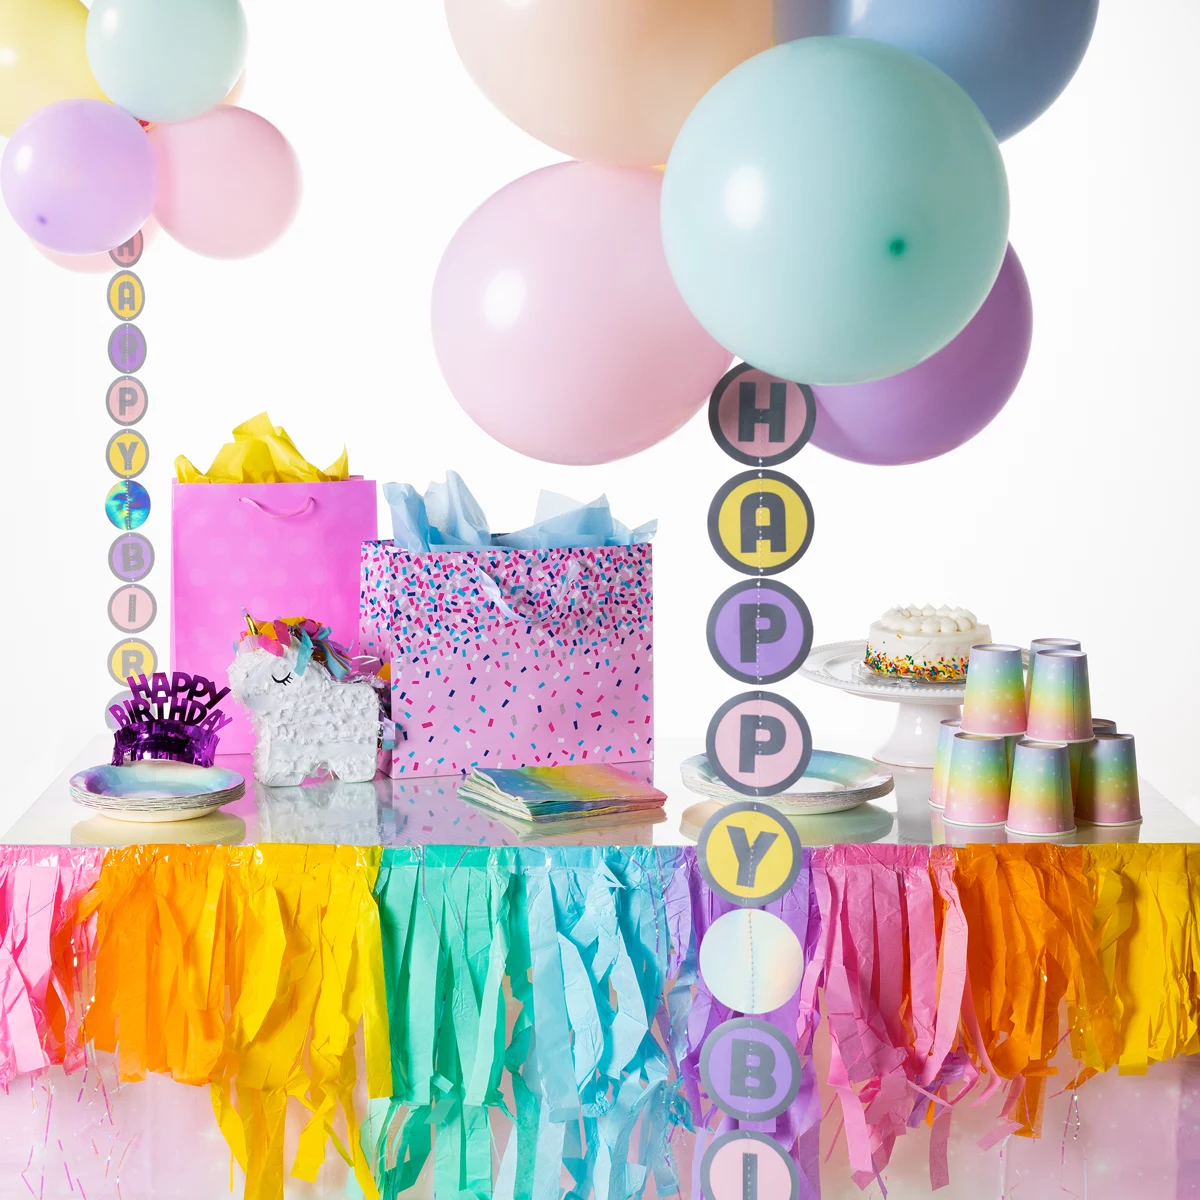 Pastel themed party table with Happy Birthday balloon tail display